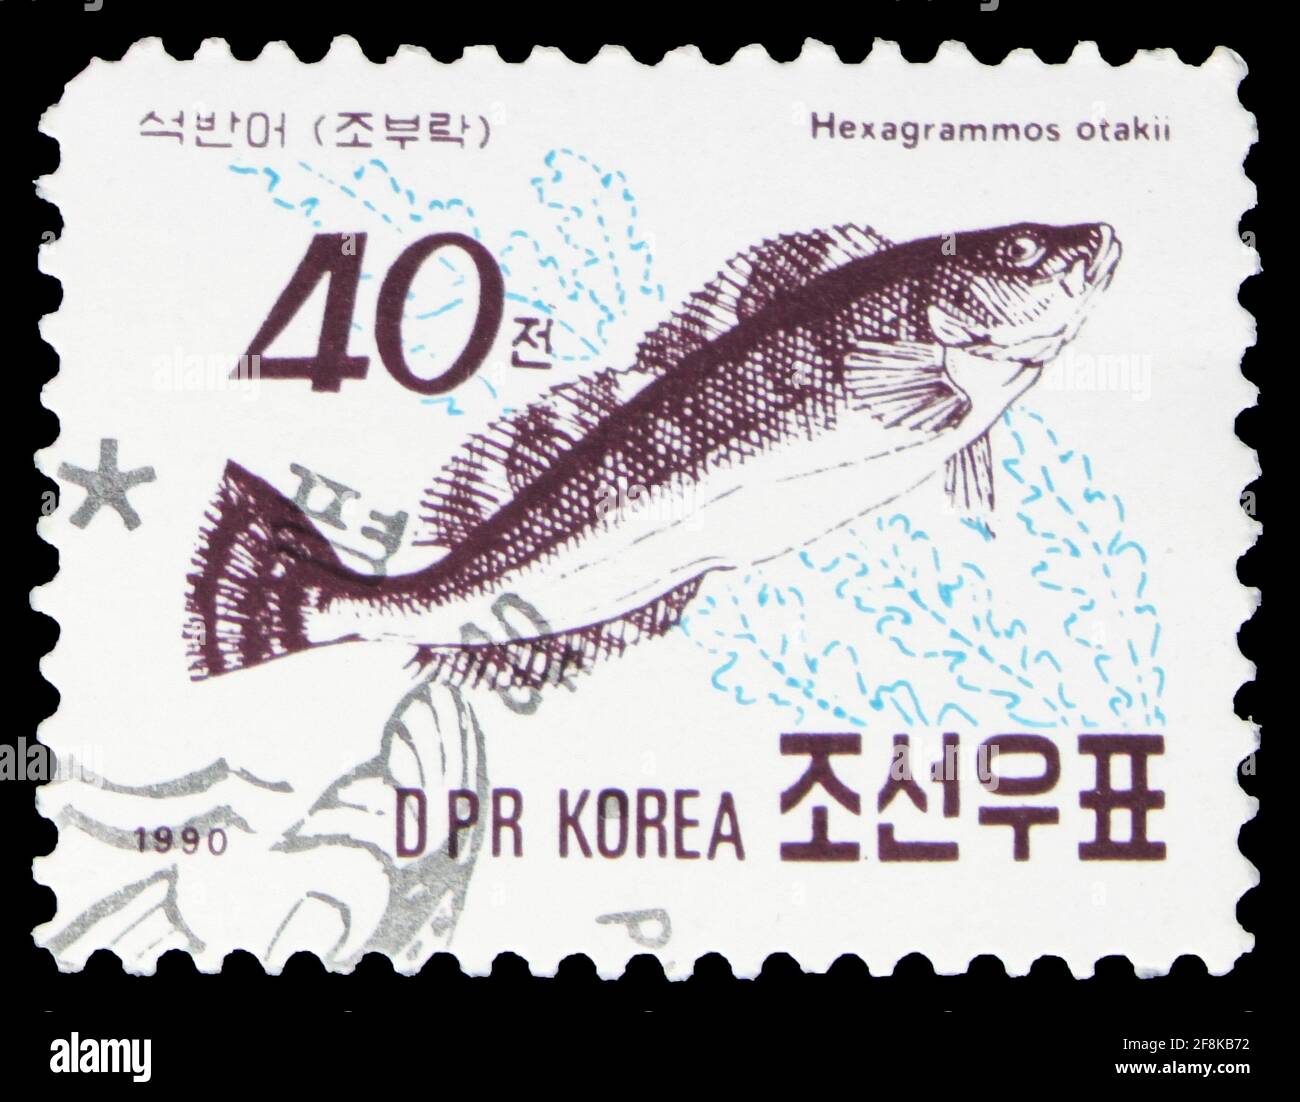 MOSCOW, RUSSIA - OCTOBER 7, 2019: Postage stamp printed in Korea shows Greenling (Hexagrammos otakii), Fishes of the Eastern Sea serie, 40 North Korea Stock Photo